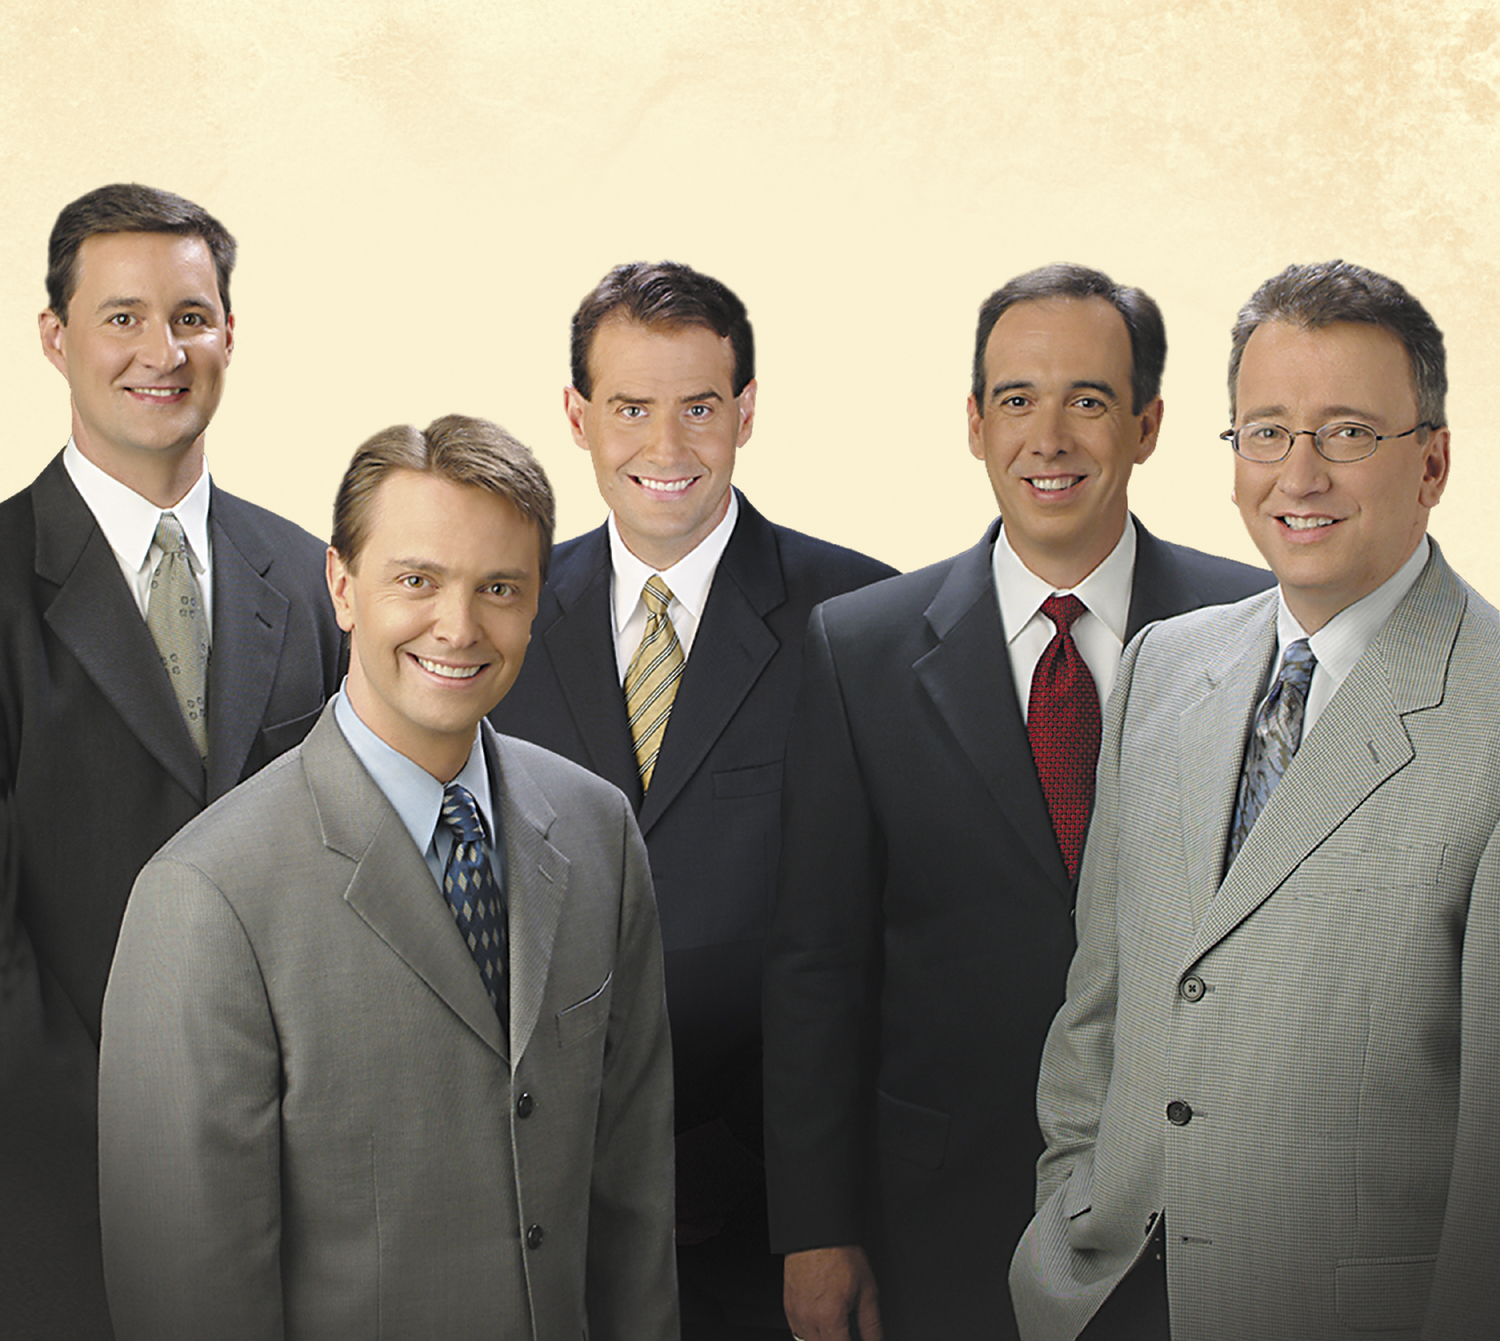 What are some southern gospel groups?